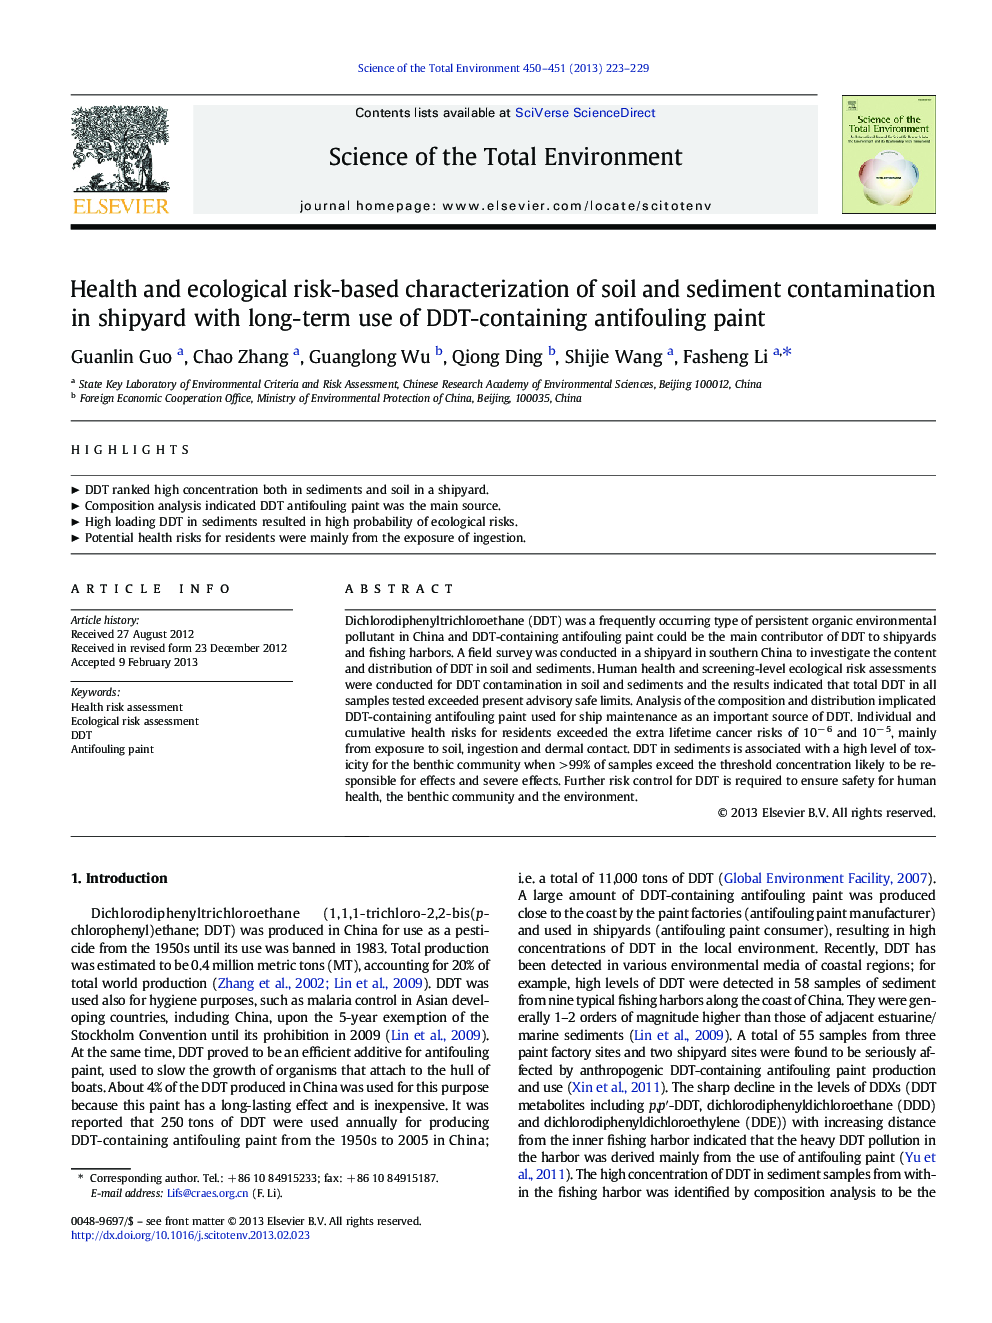 Health and ecological risk-based characterization of soil and sediment contamination in shipyard with long-term use of DDT-containing antifouling paint